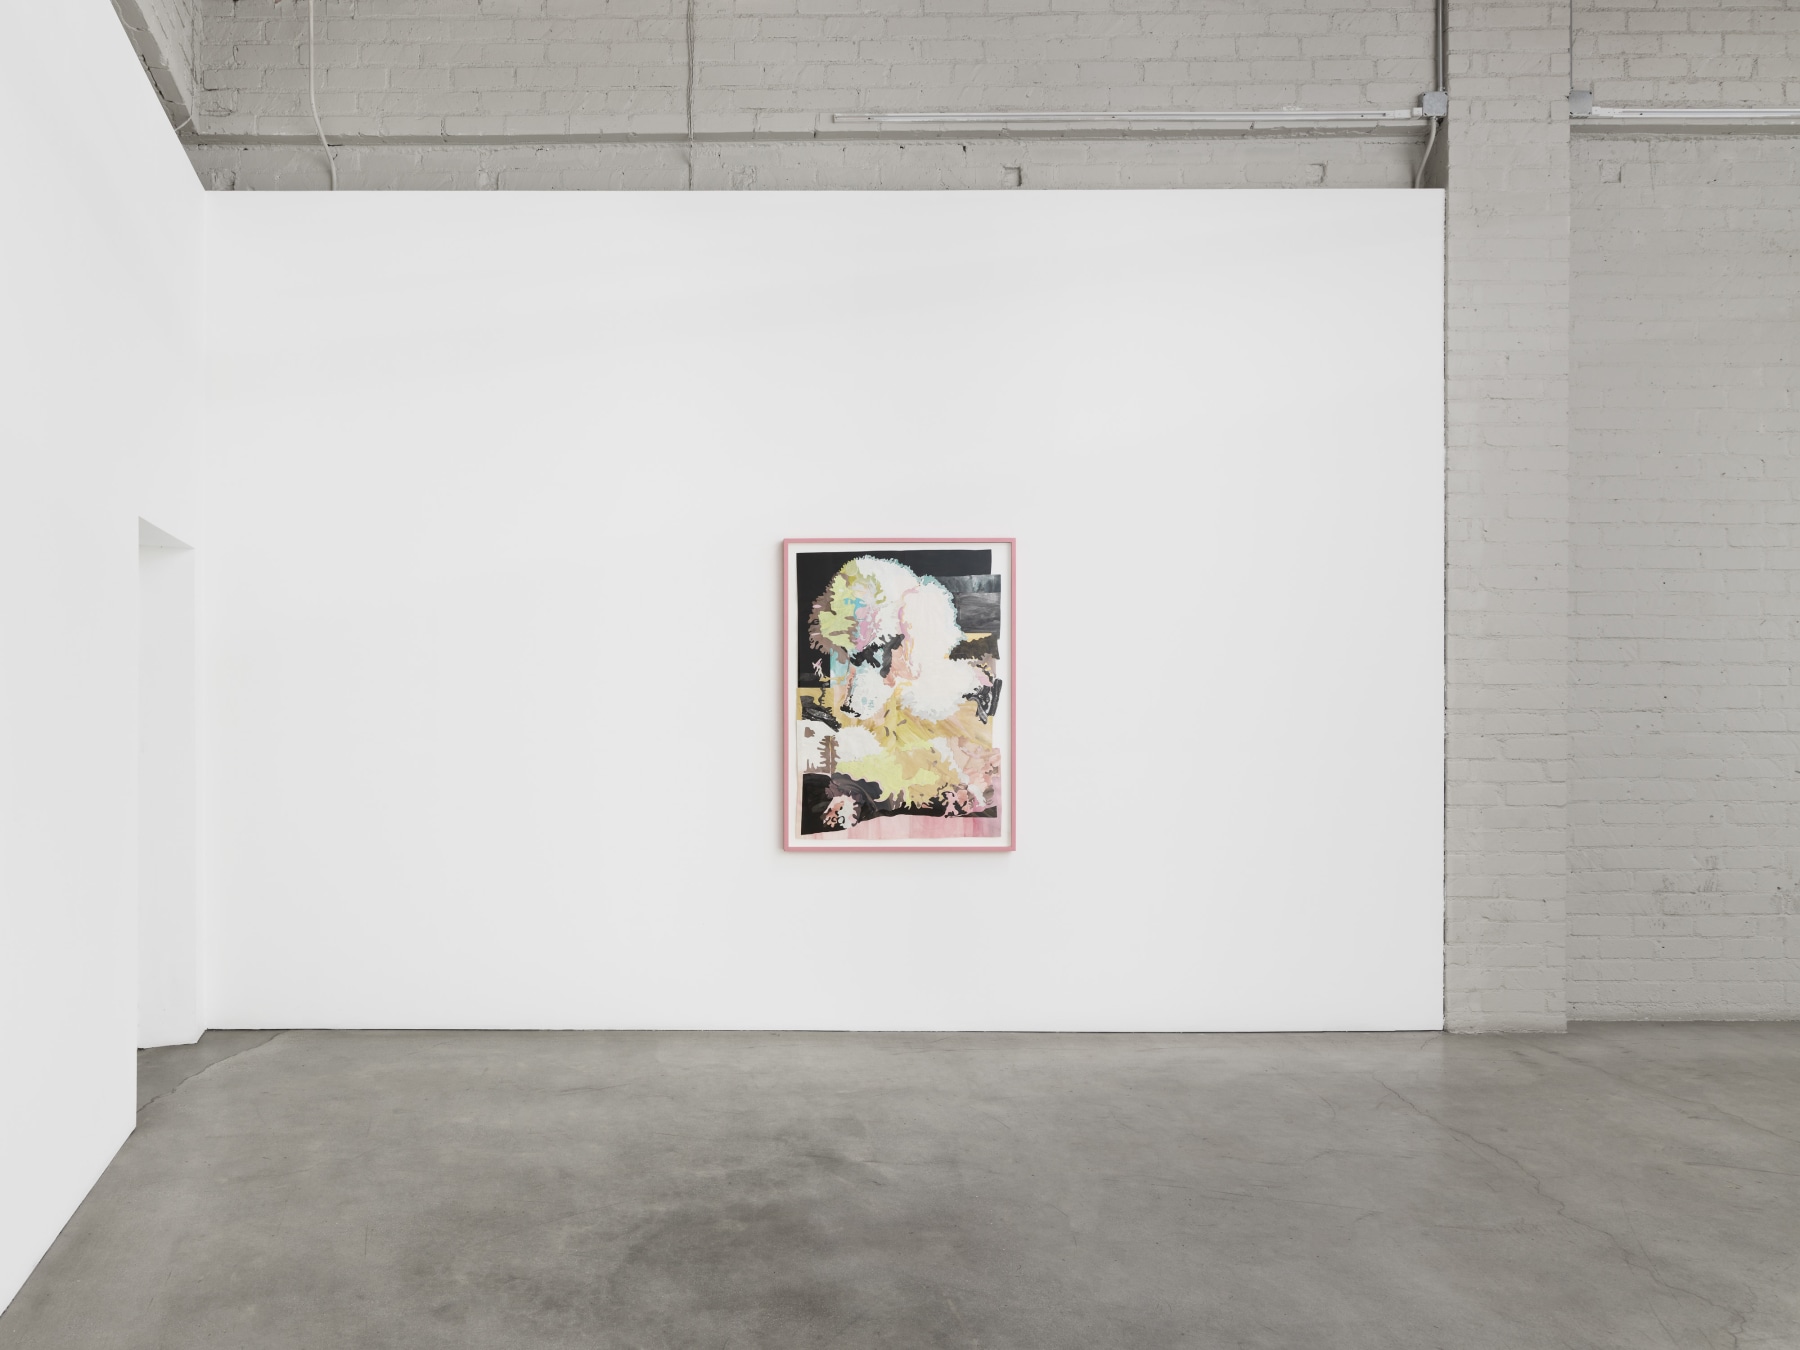 Clare Woods, After Limbo, installation view, 2022